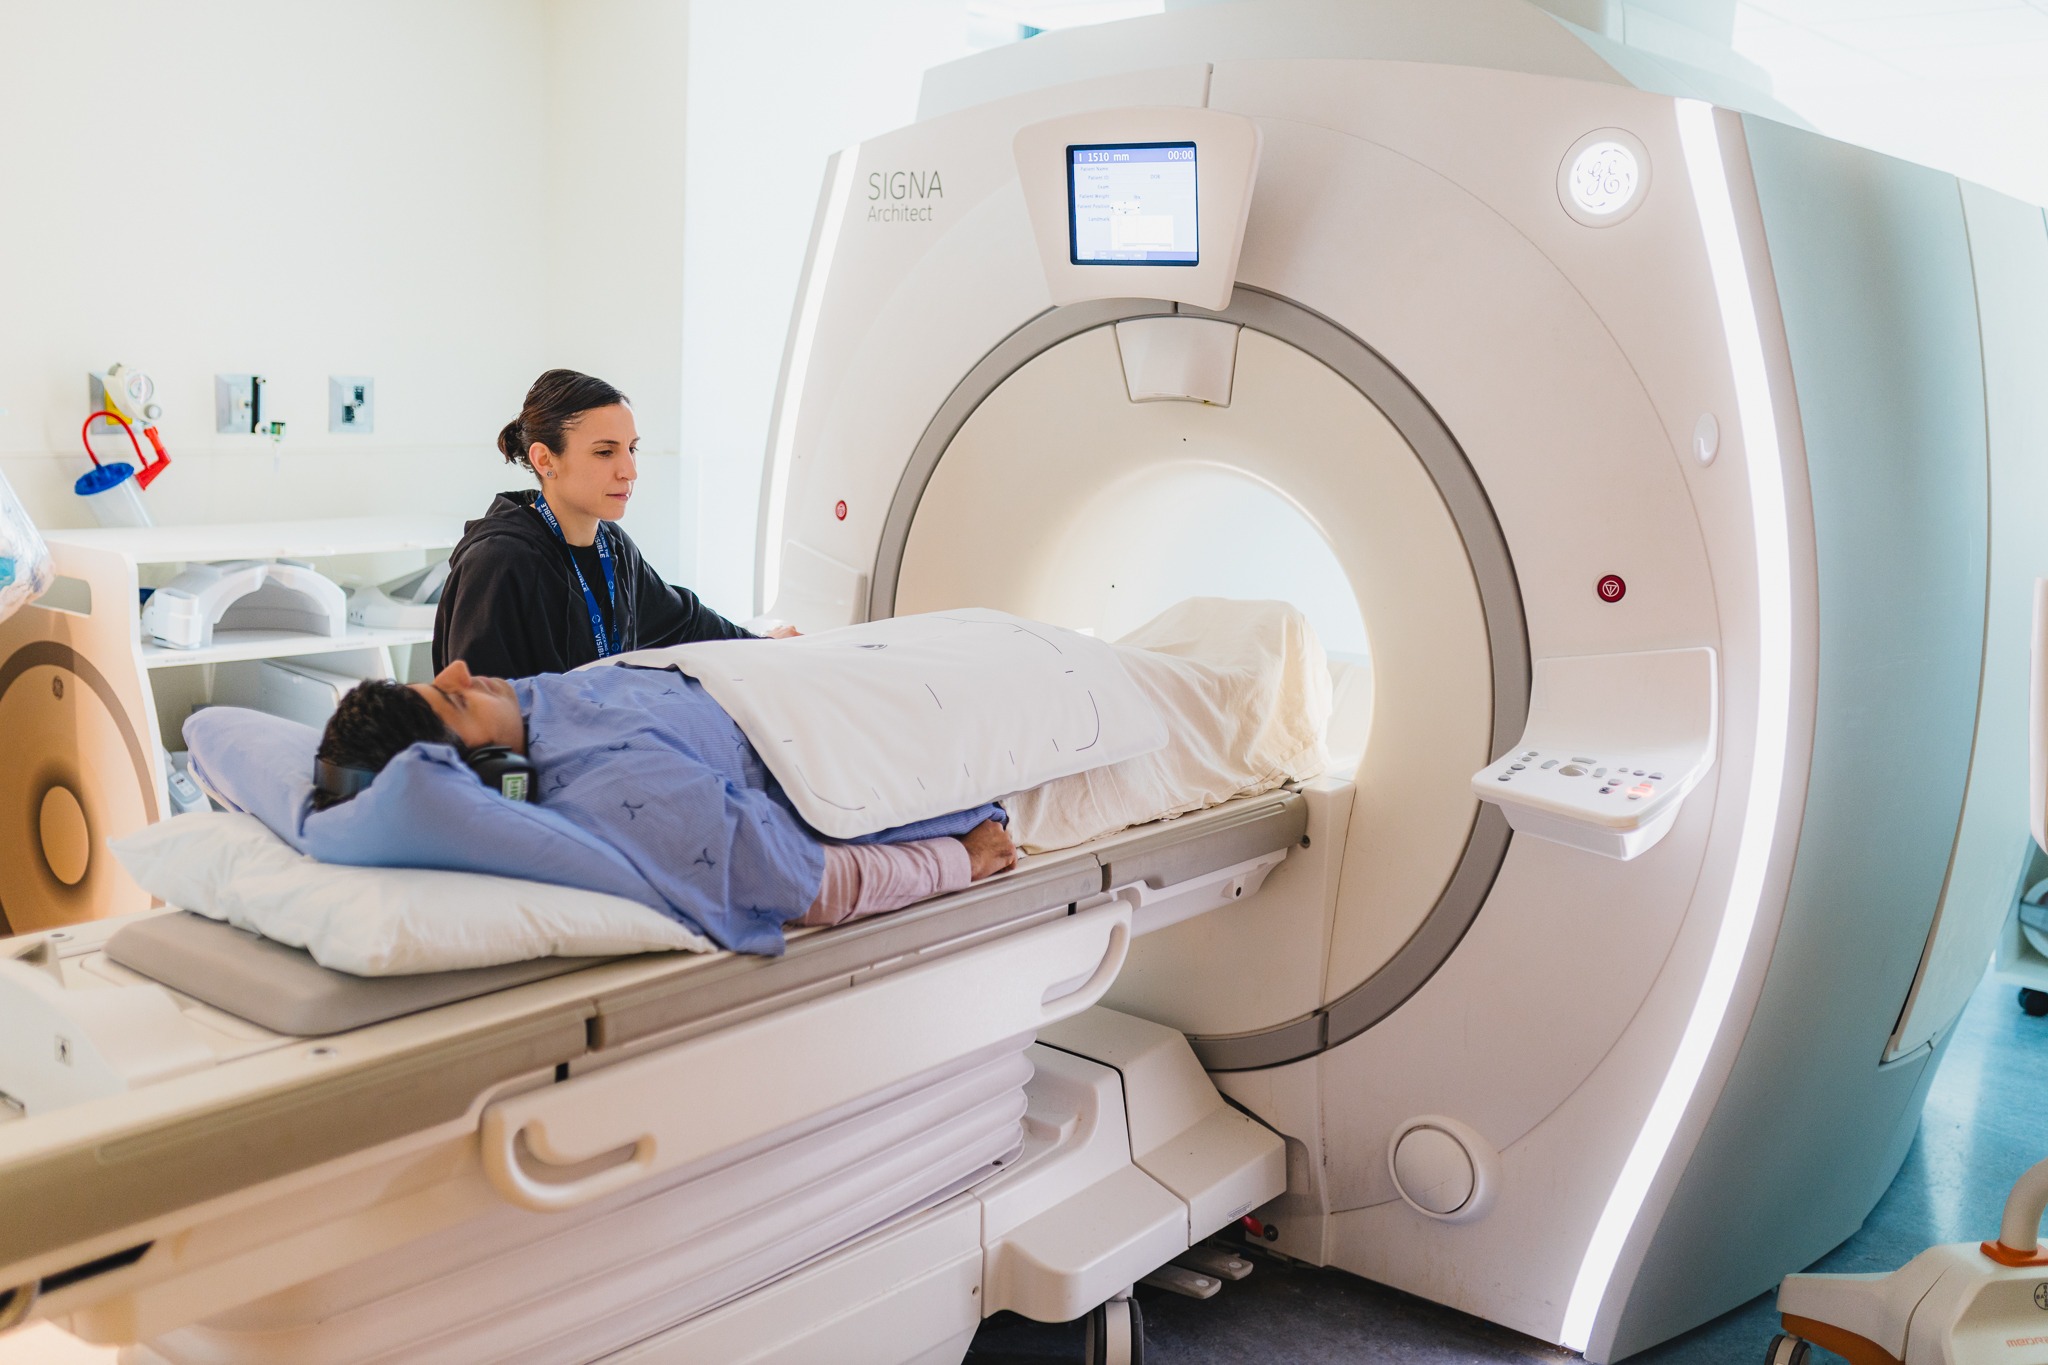 Senior MRI technologist Liz Teixeira and radiologist Dr. Ameya Madhav Kulkarni (who plays the patient in this photo) illustrate an MRI-ultrasound fusion biopsy procedure now available at Juravinski Hospital and Cancer Centre.